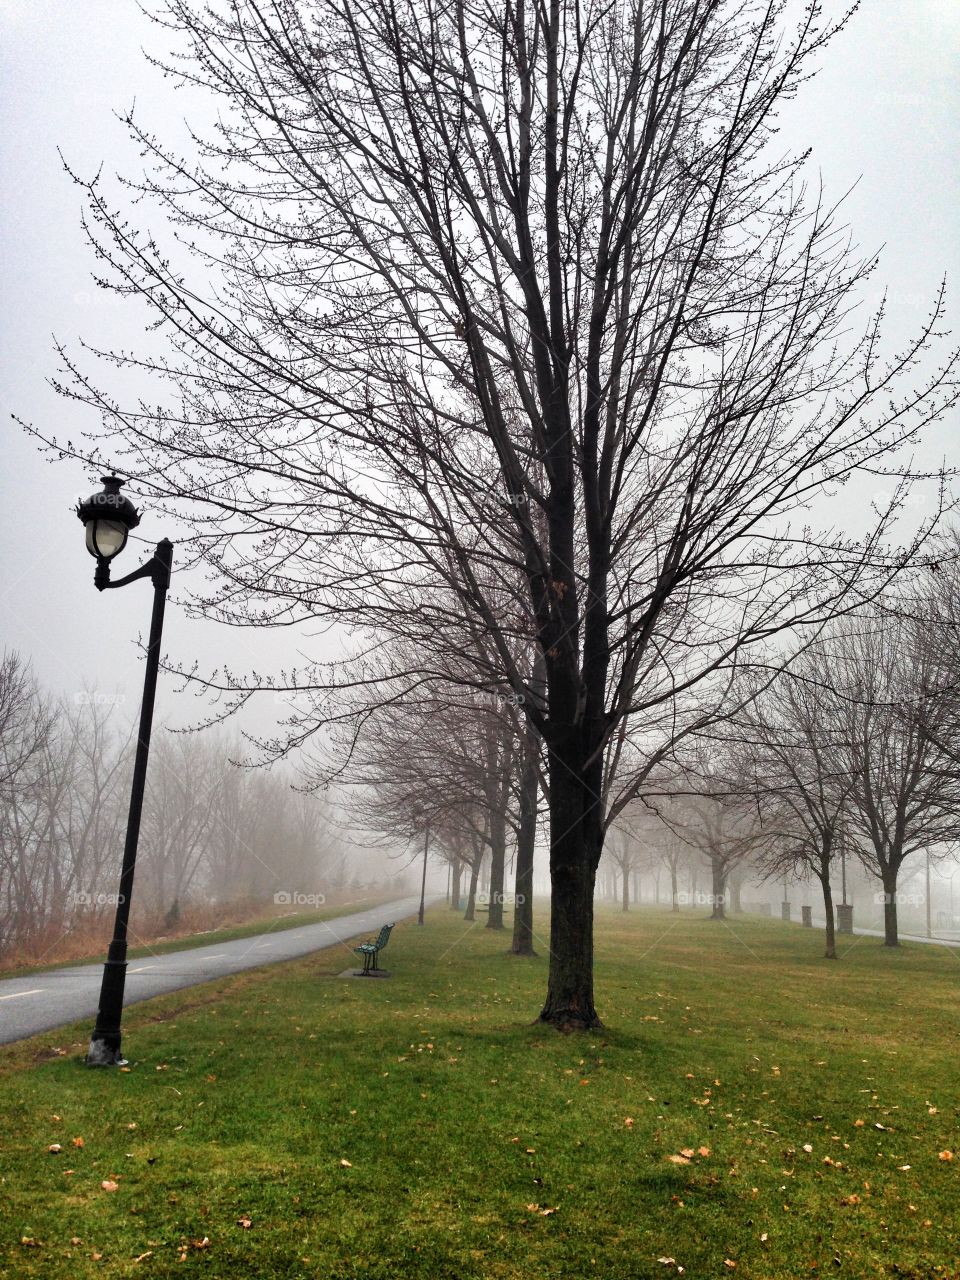 Foggy Day at the Park